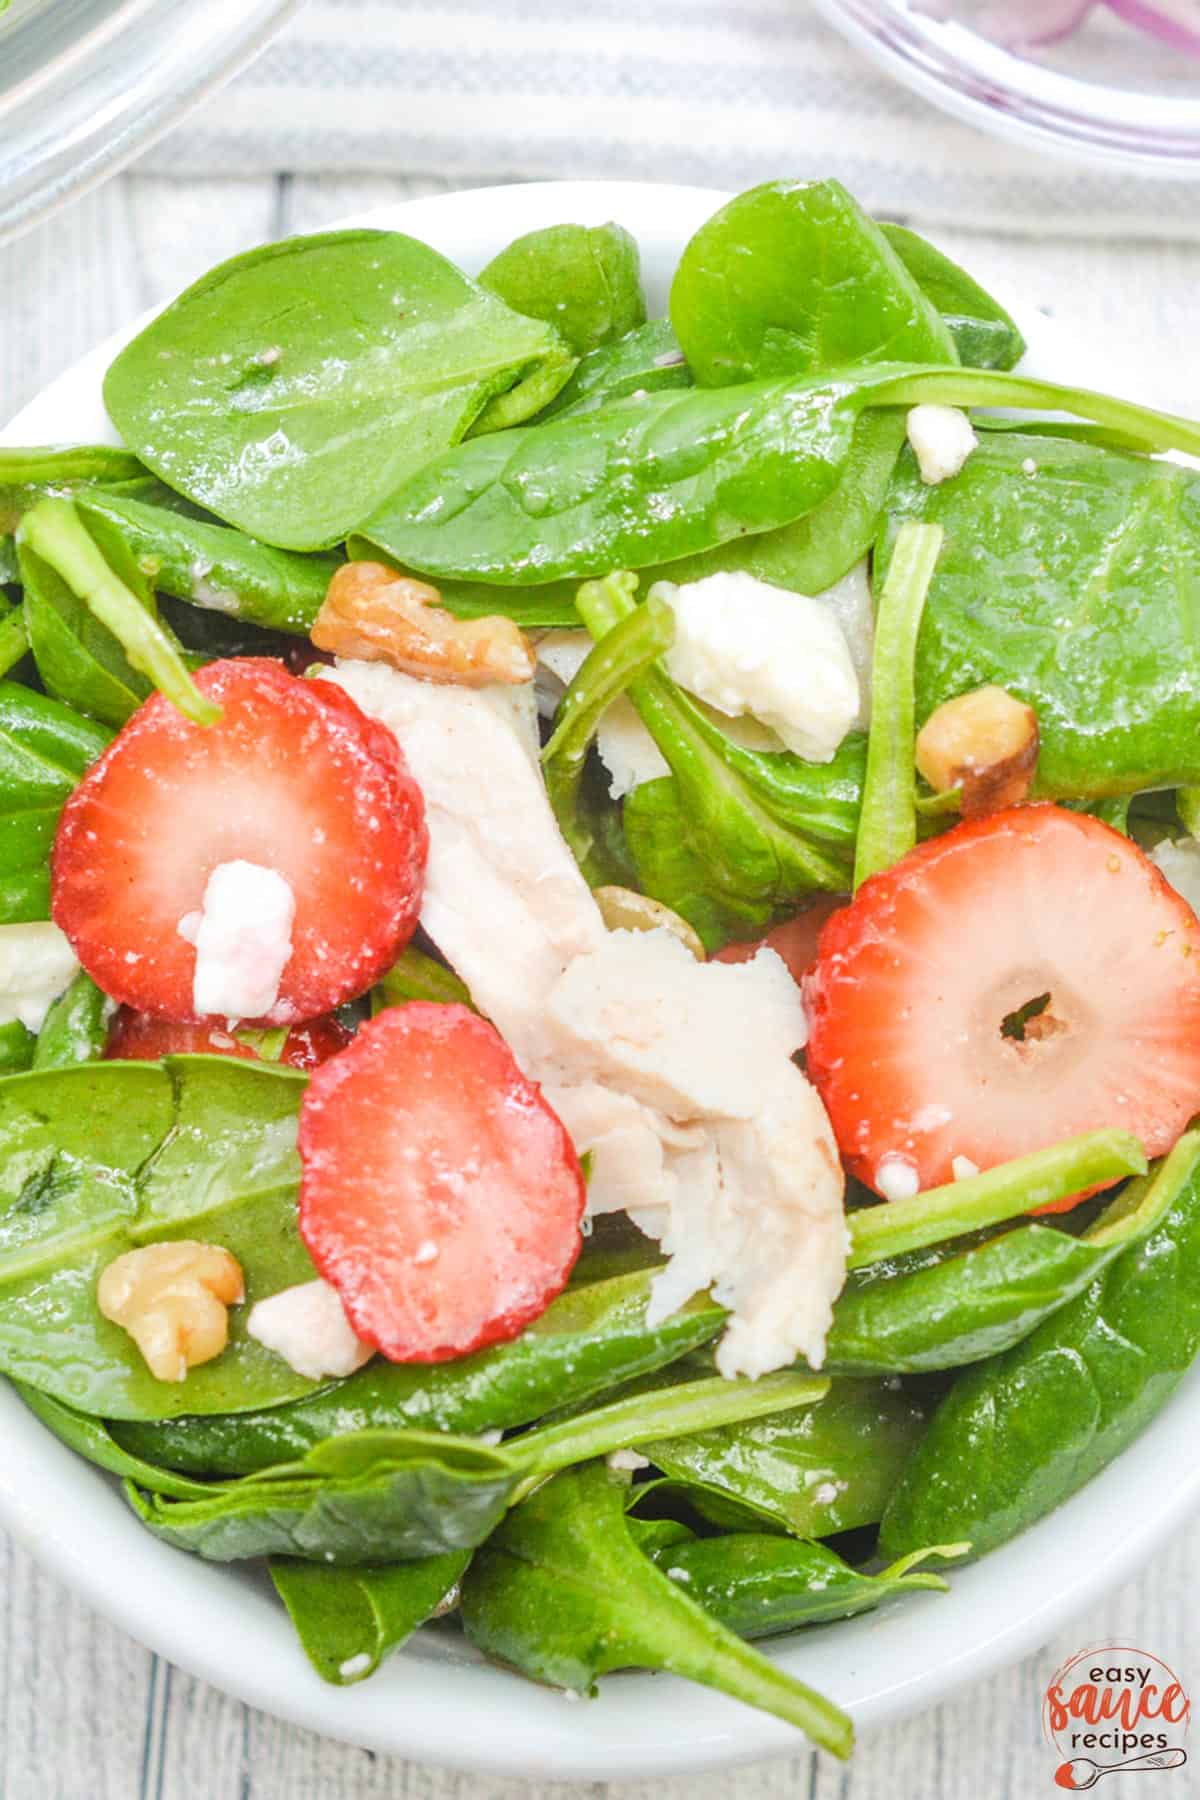 champagne vinaigrette overtop a salad with chicken